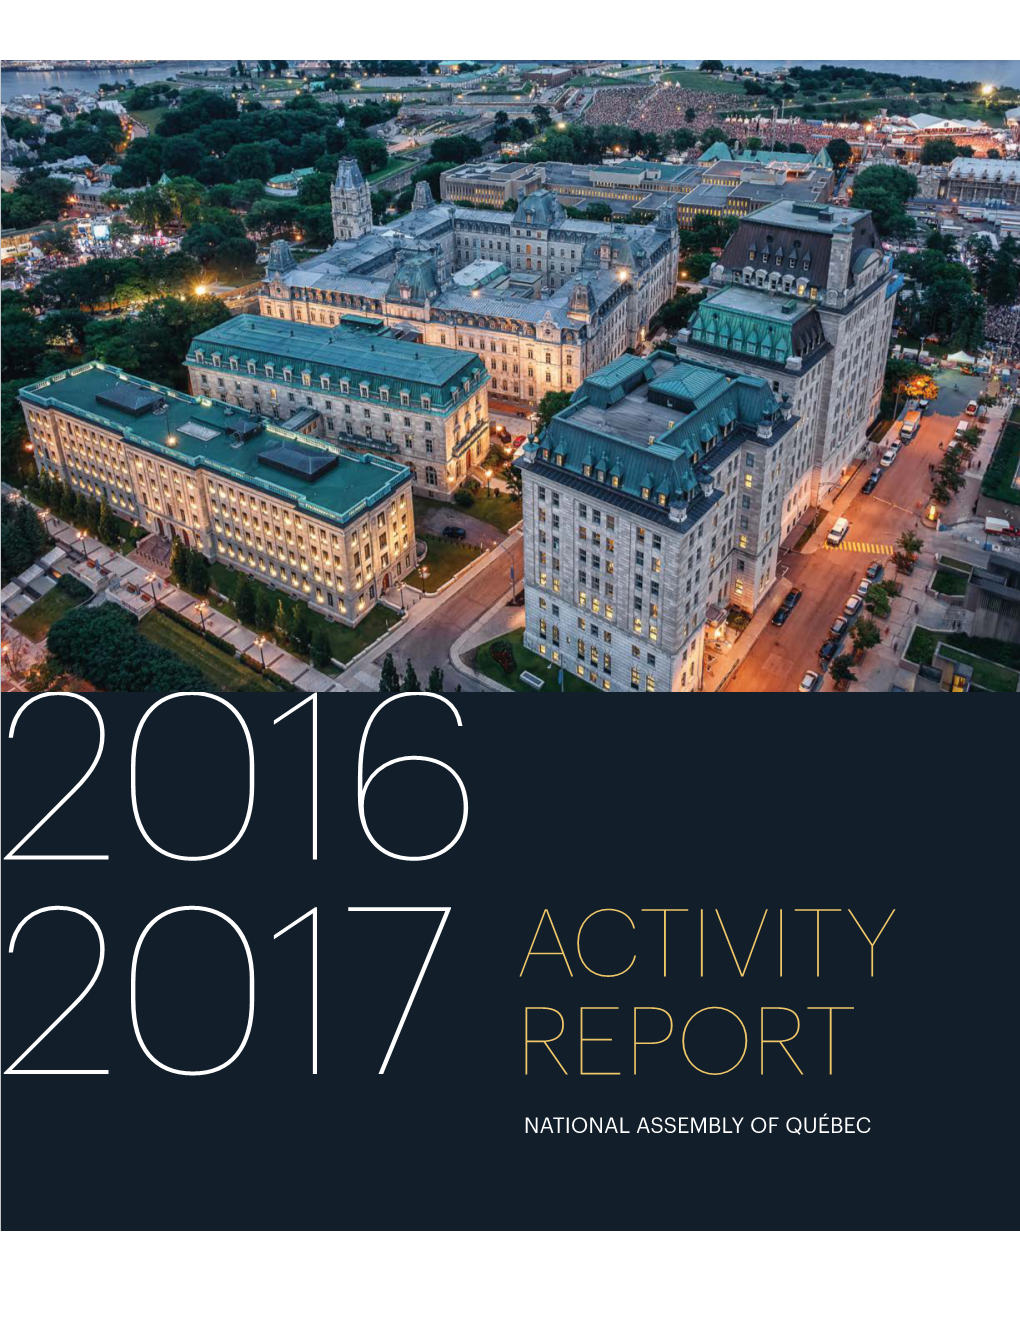 Activity Report, an Overview of the Year April 1, 2016, to March 31, 2017, and a Testament to the Institution’S Many Achievements